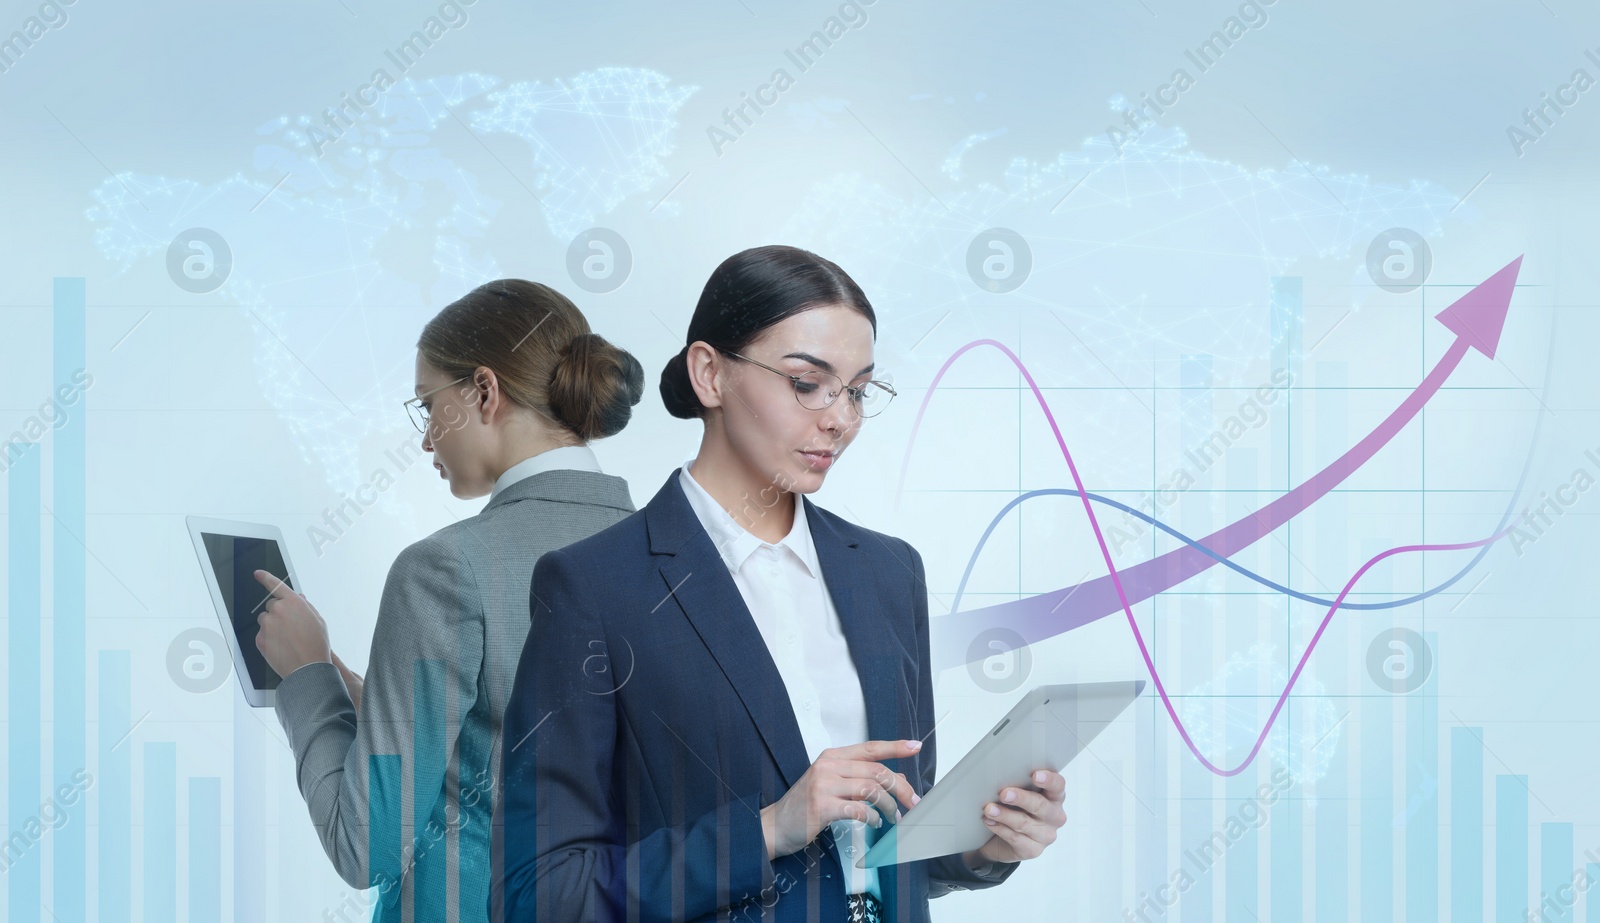 Image of Forex trading. Charts with schemes, business women and world map on background